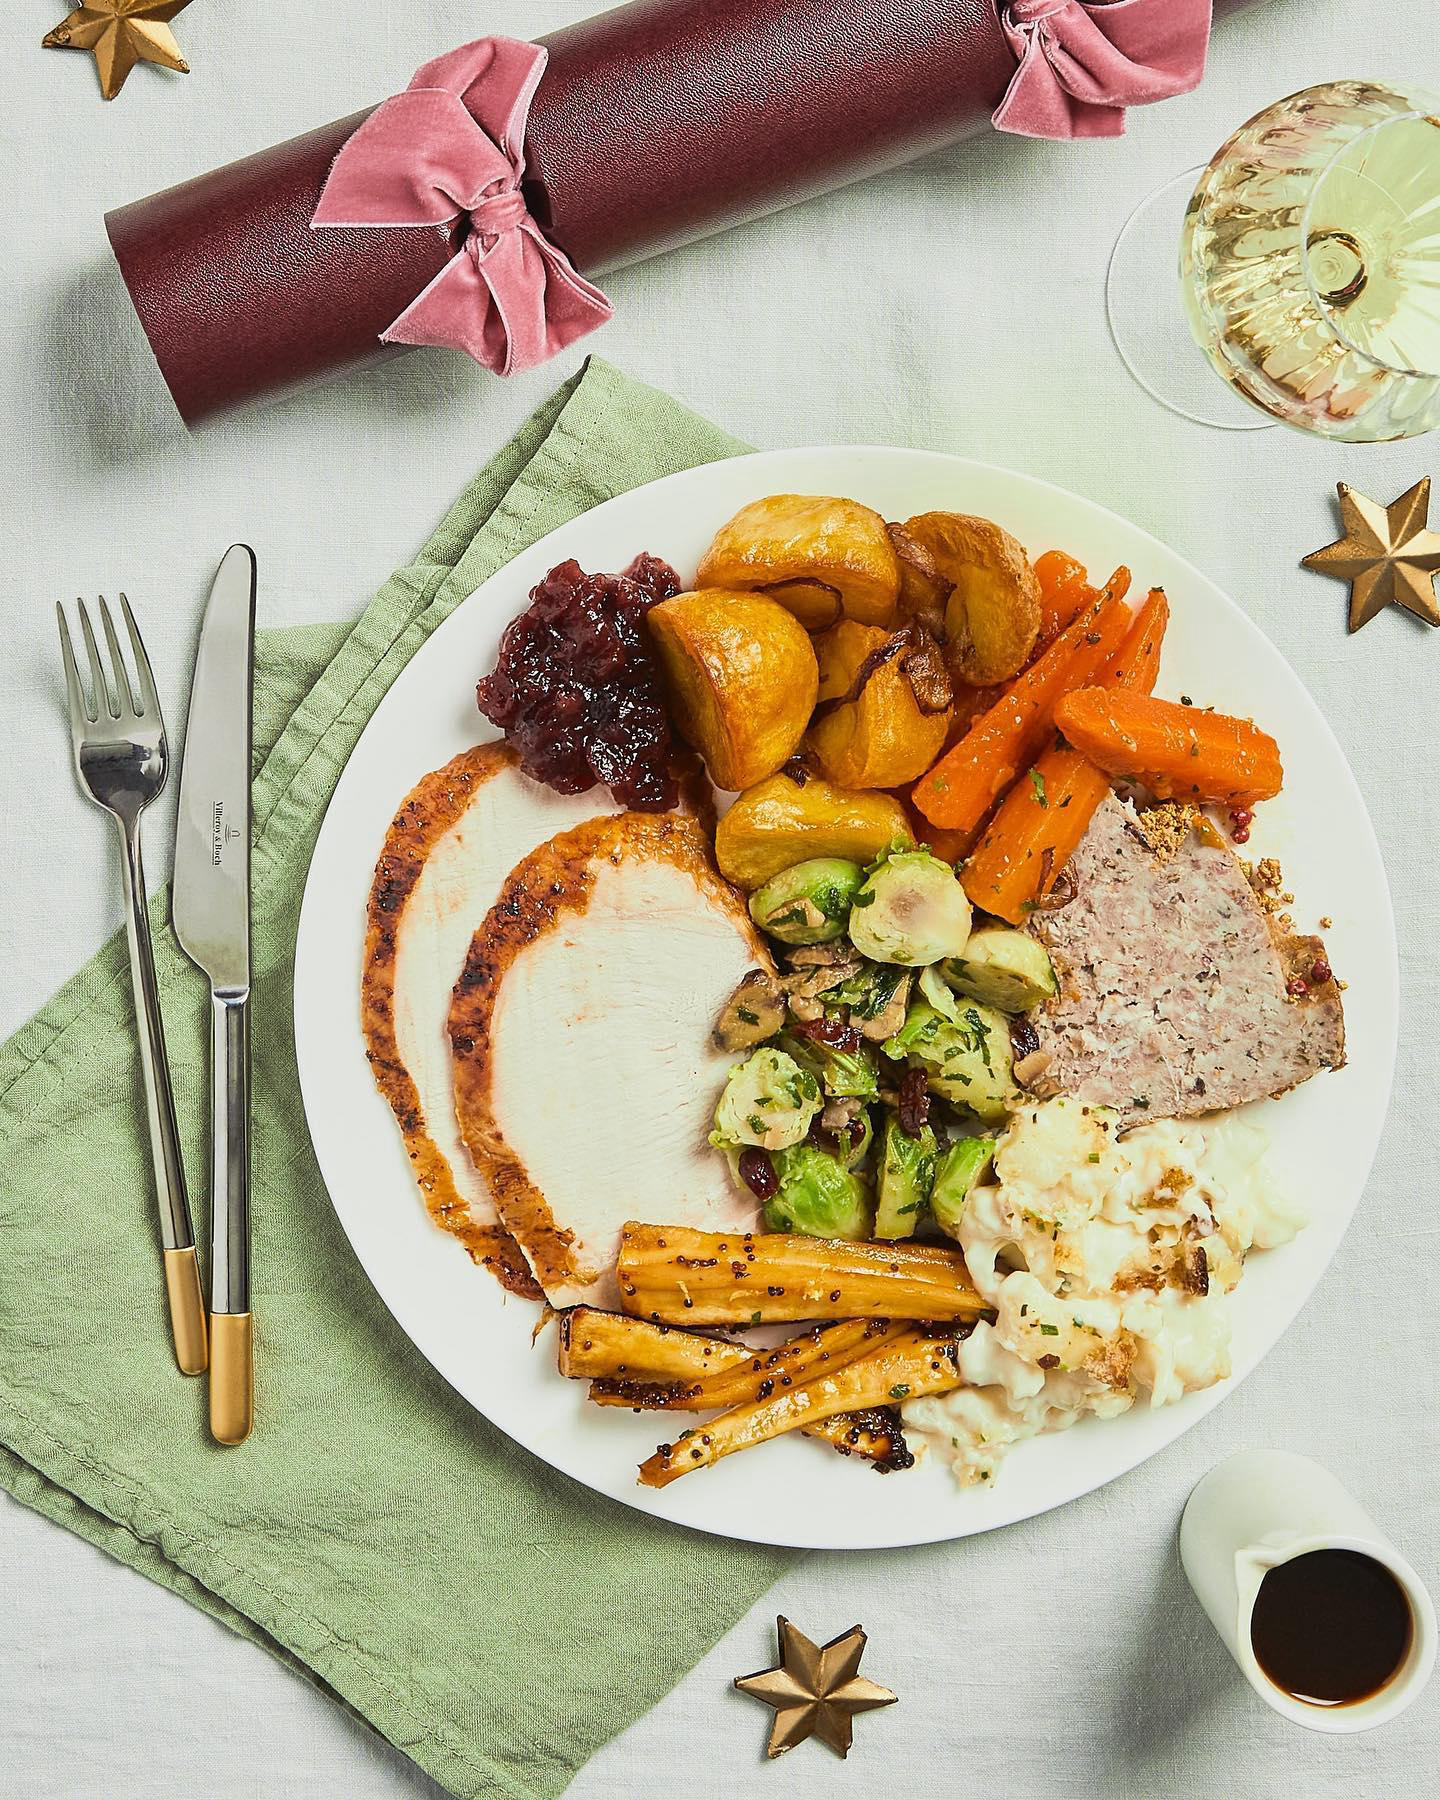 Harrods Food - What makes a classic Christmas dinner